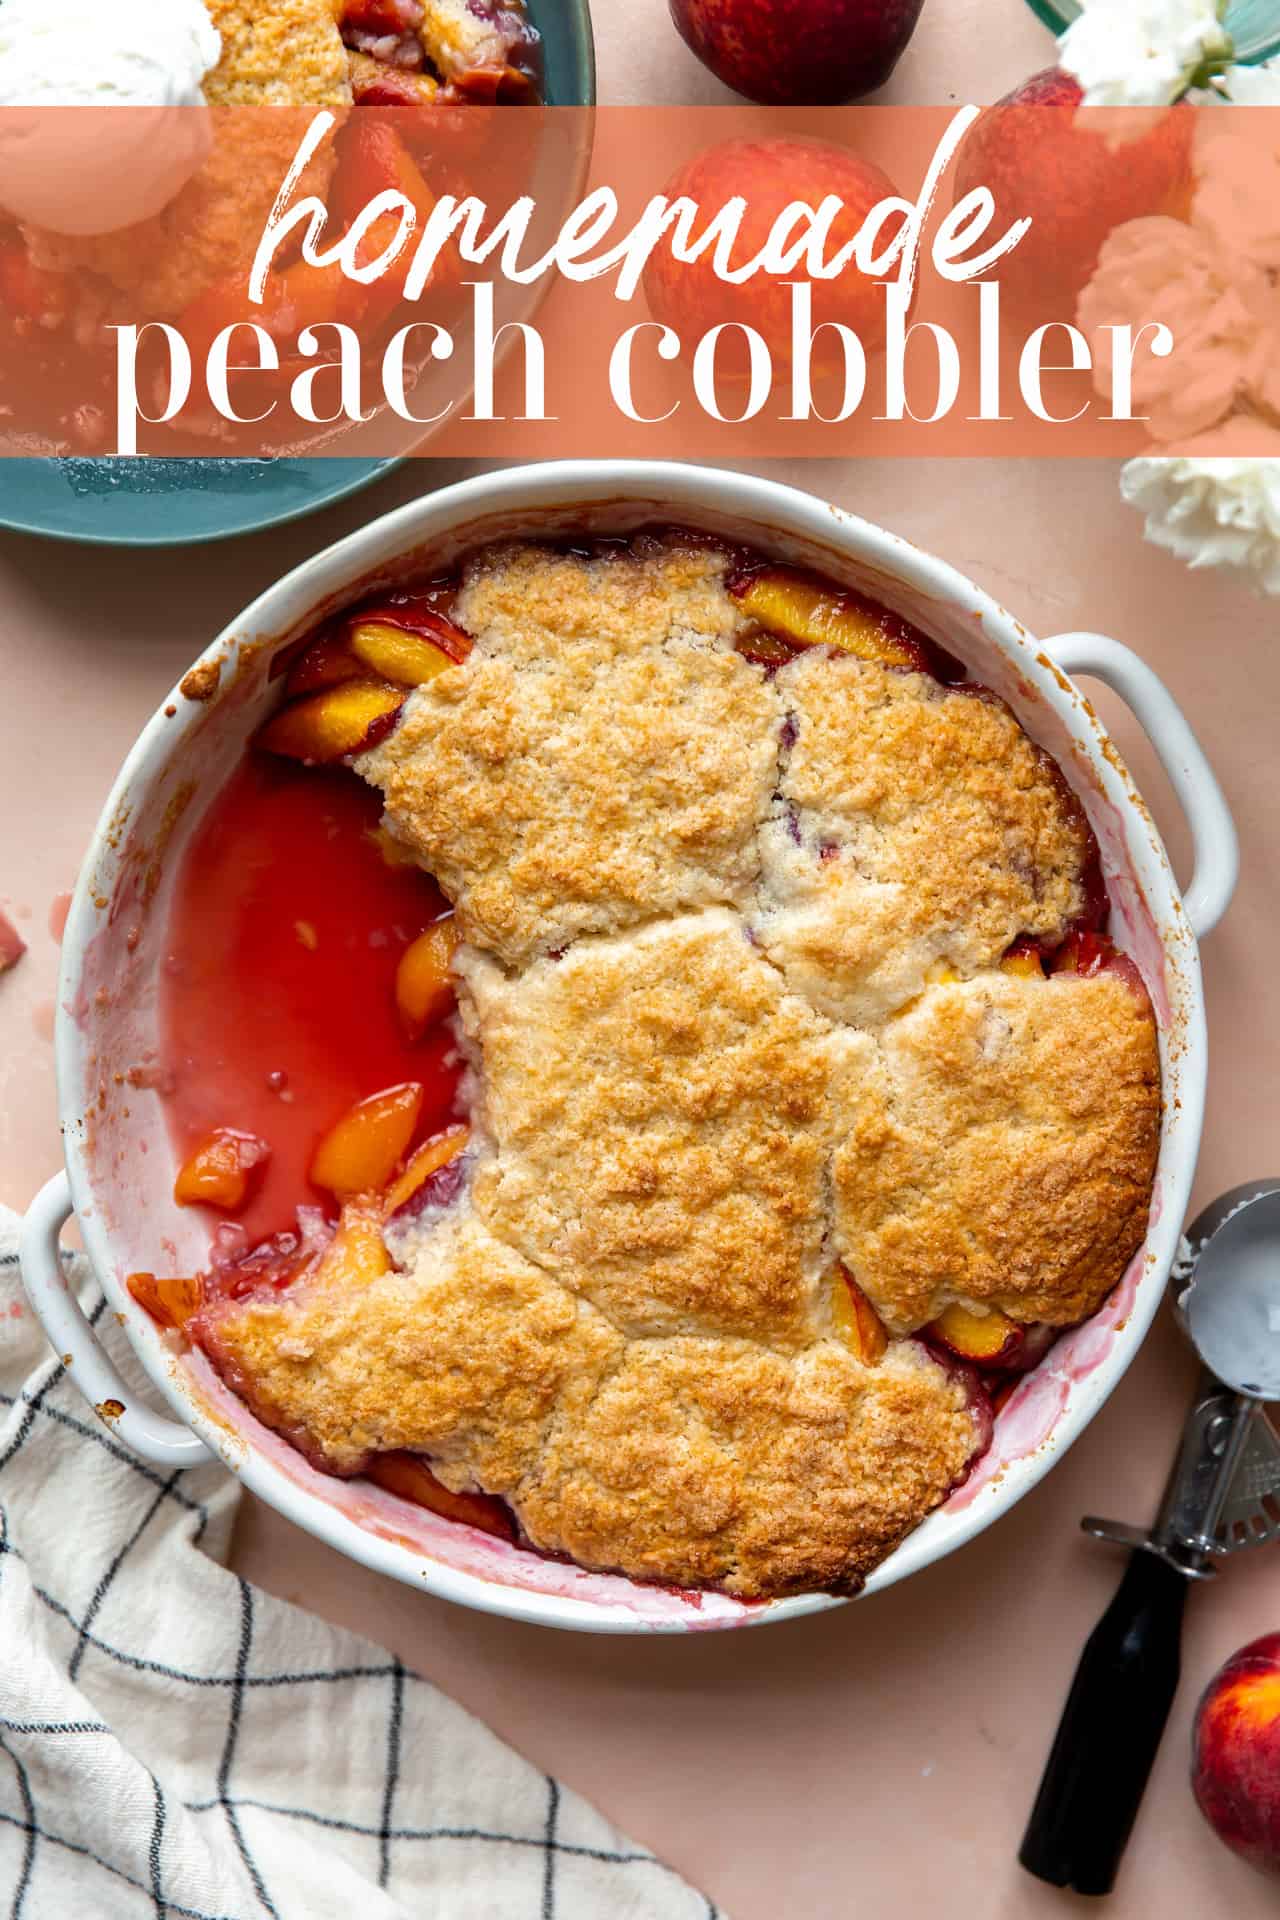 Dish filled with baked peach cobbler